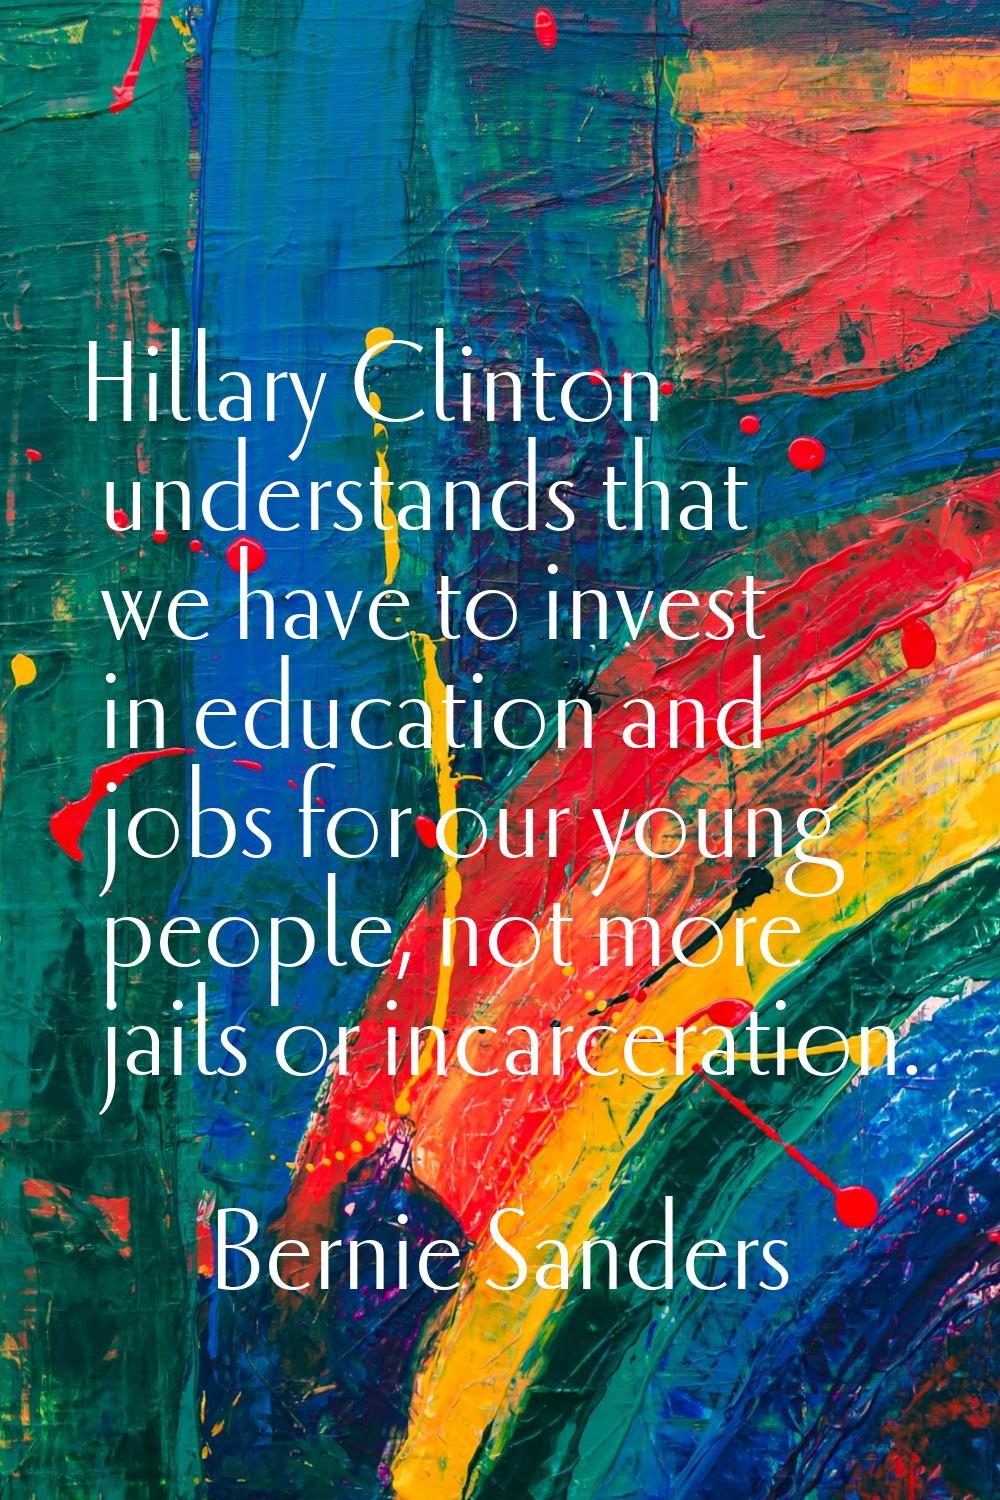 Hillary Clinton understands that we have to invest in education and jobs for our young people, not 